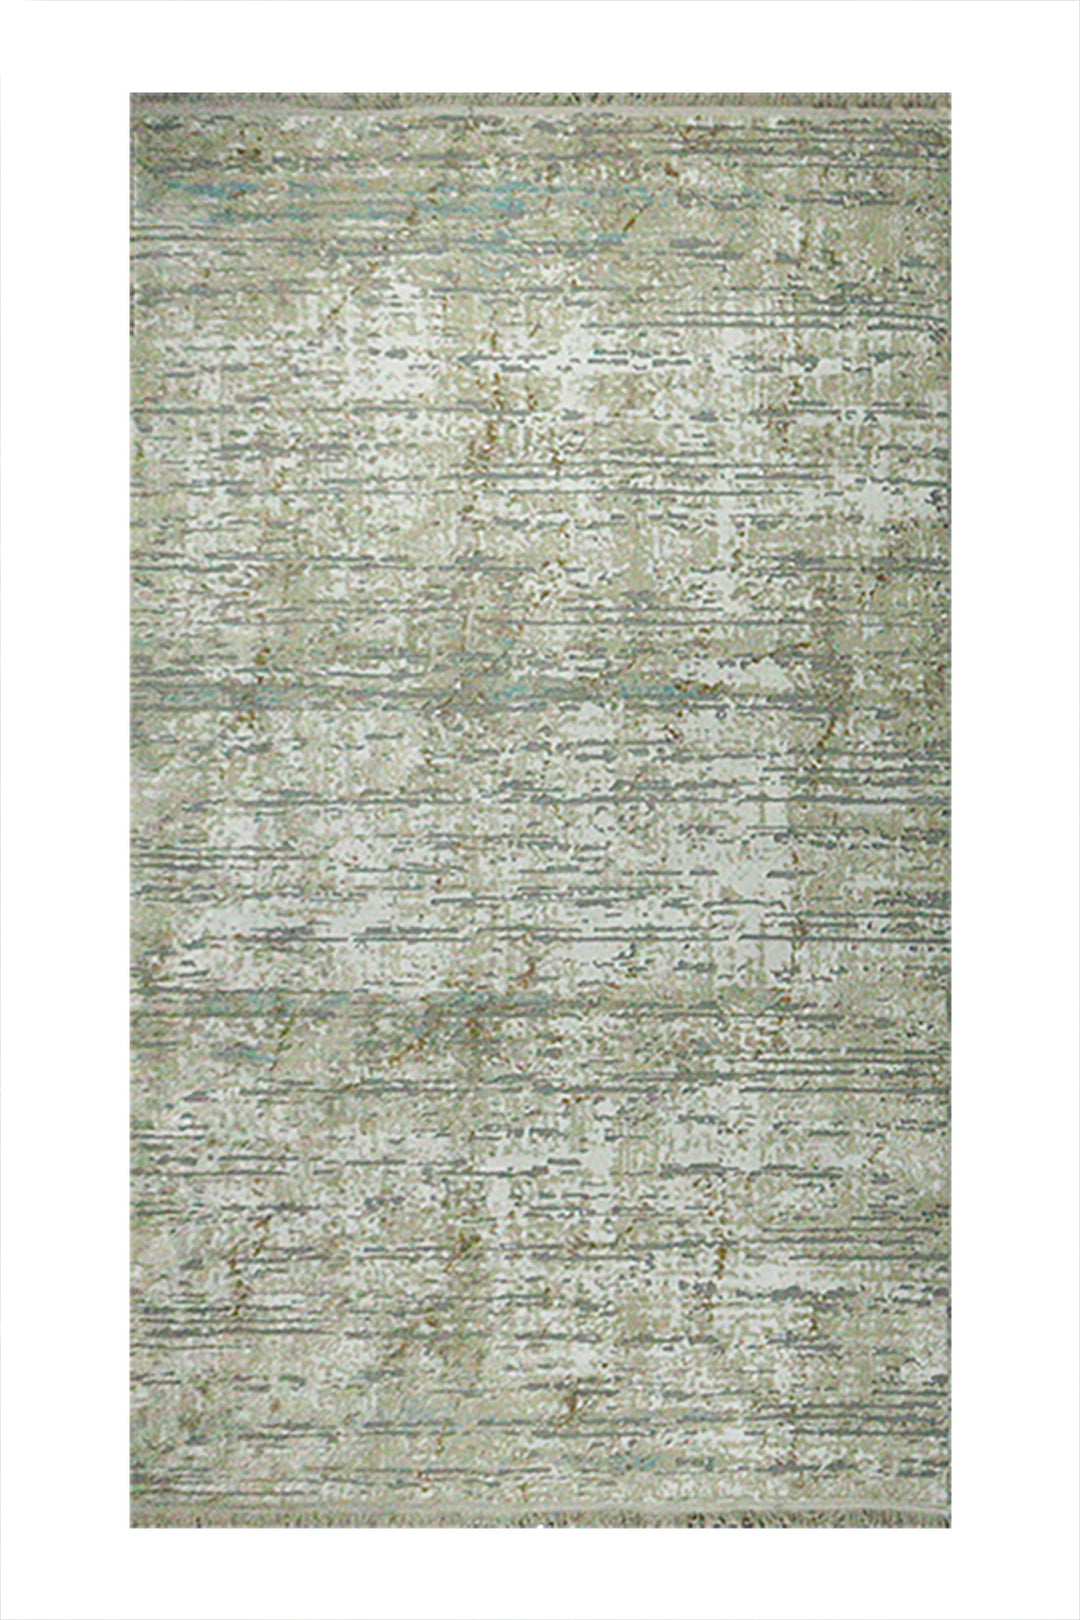 Turkish Modern Festival WD Rug - 5.6 x 8.2 FT - Gray - Sleek and Minimalist for Chic Interiors